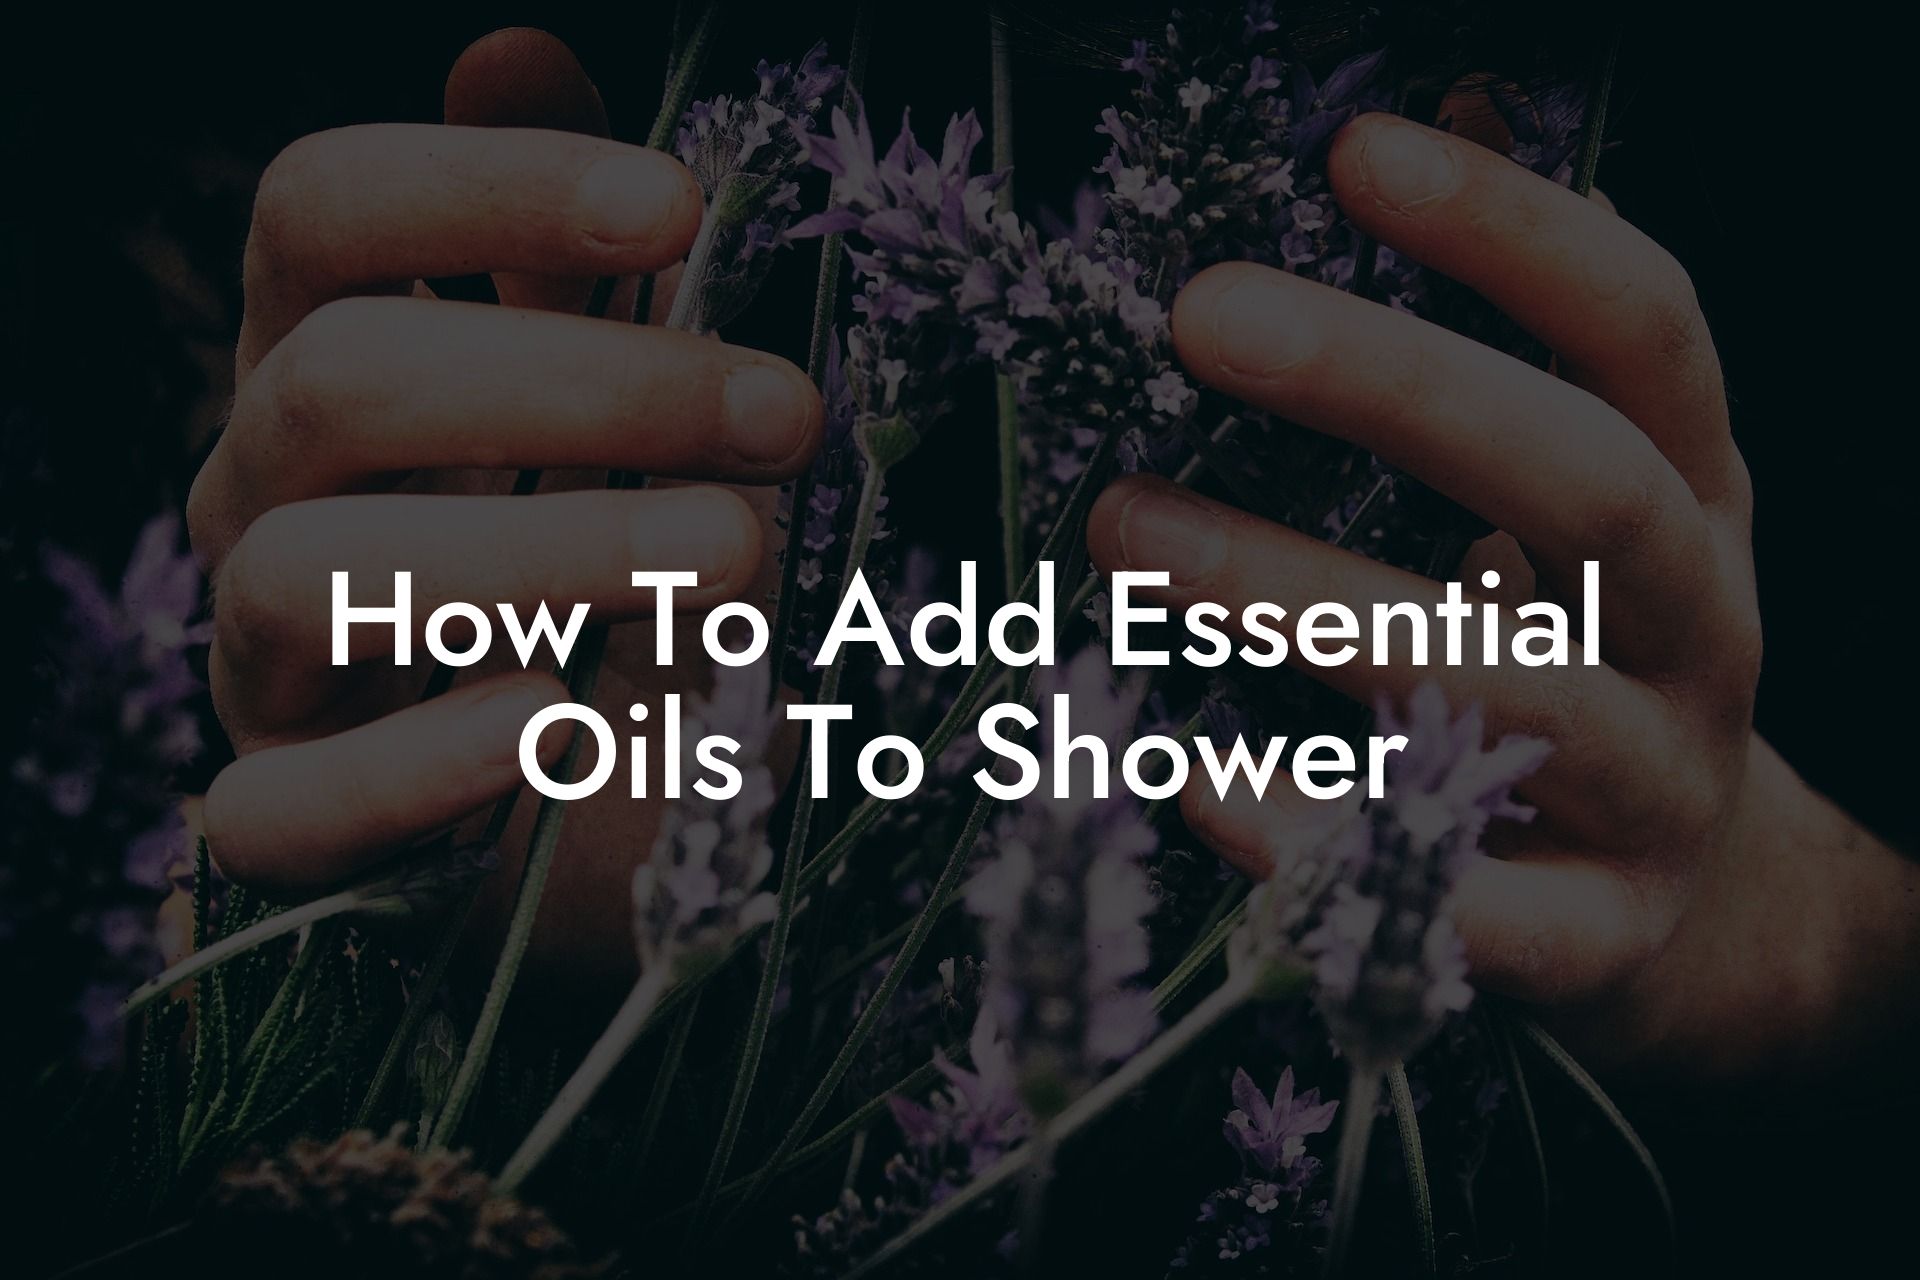 How To Add Essential Oils To Shower